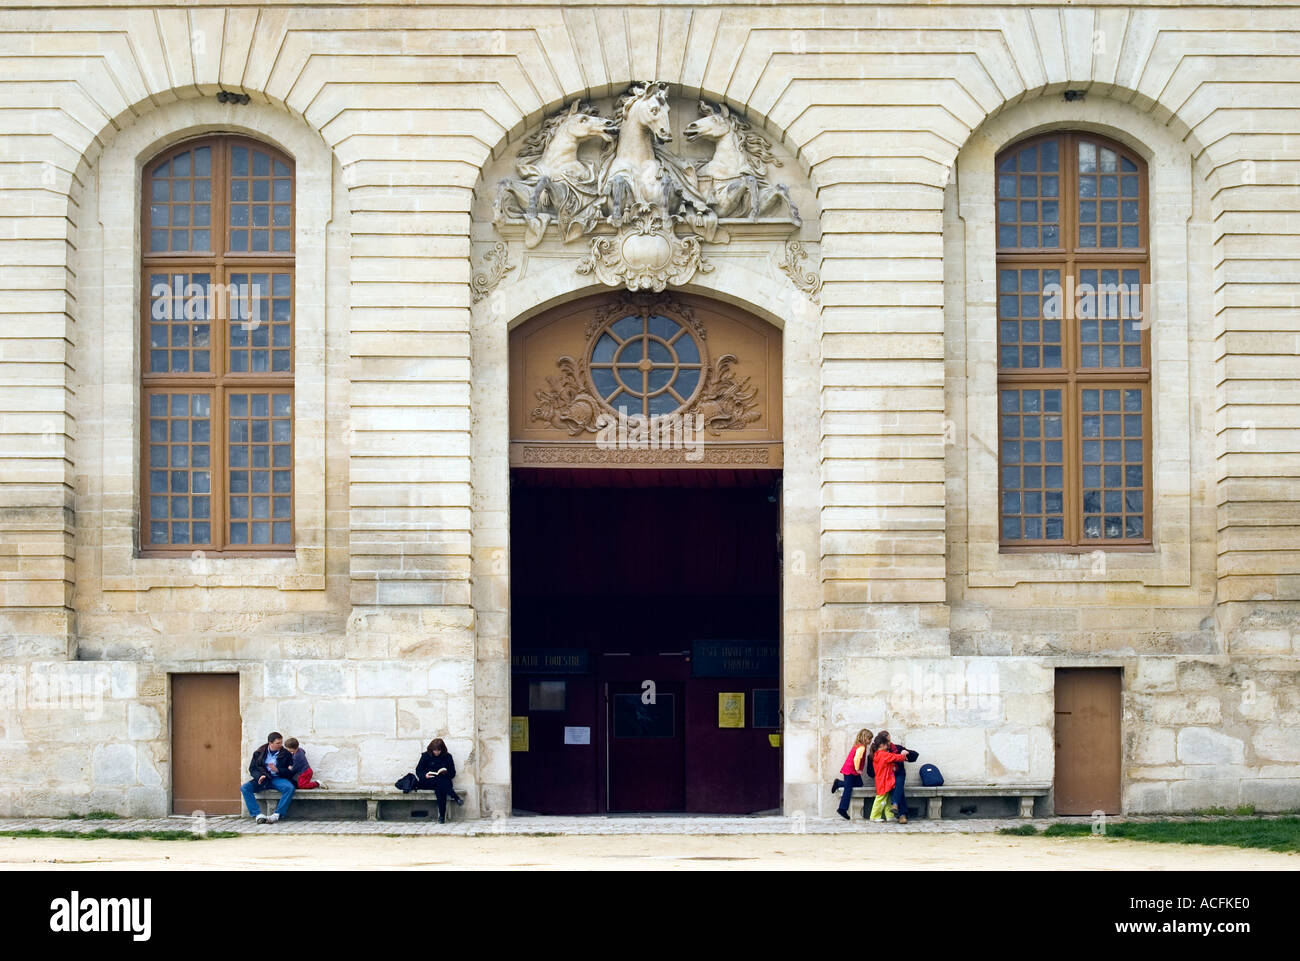 Entrance To The Grand Stables Chantilly France Stock Photo Alamy